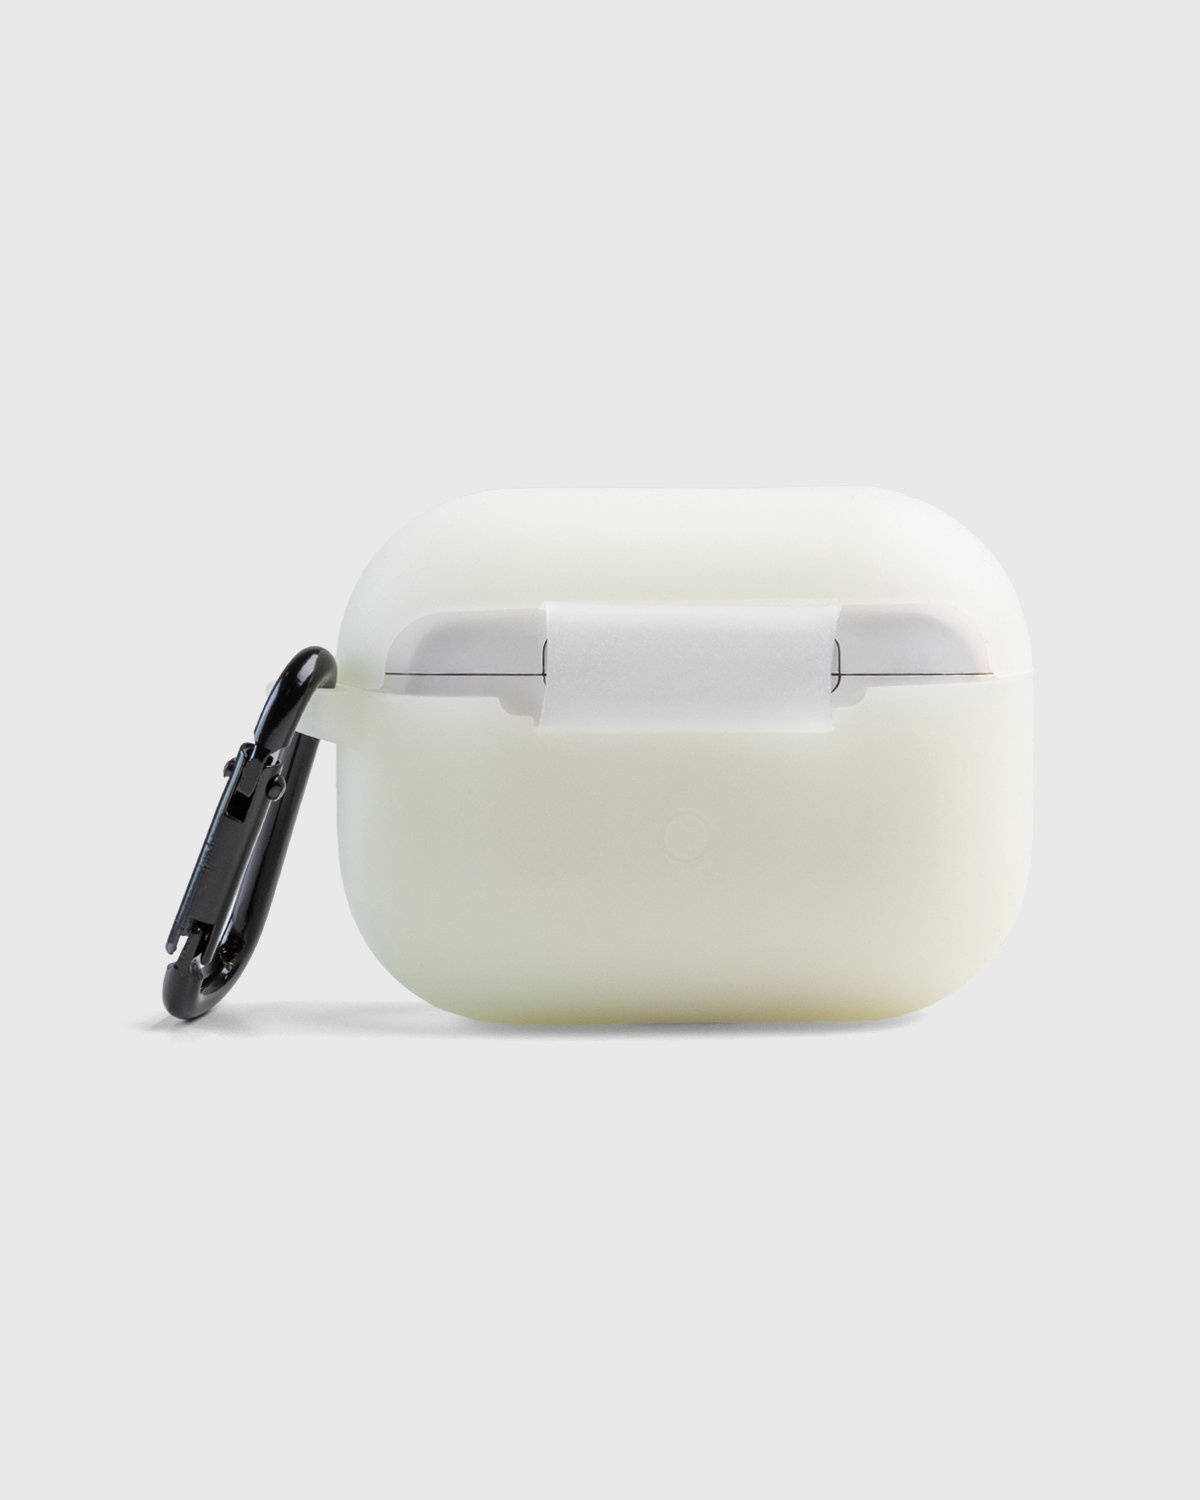 Carhartt WIP – Synthetic Realities AirPods Case Glow In The Dark Black - Air Pod Cases - White - Image 2